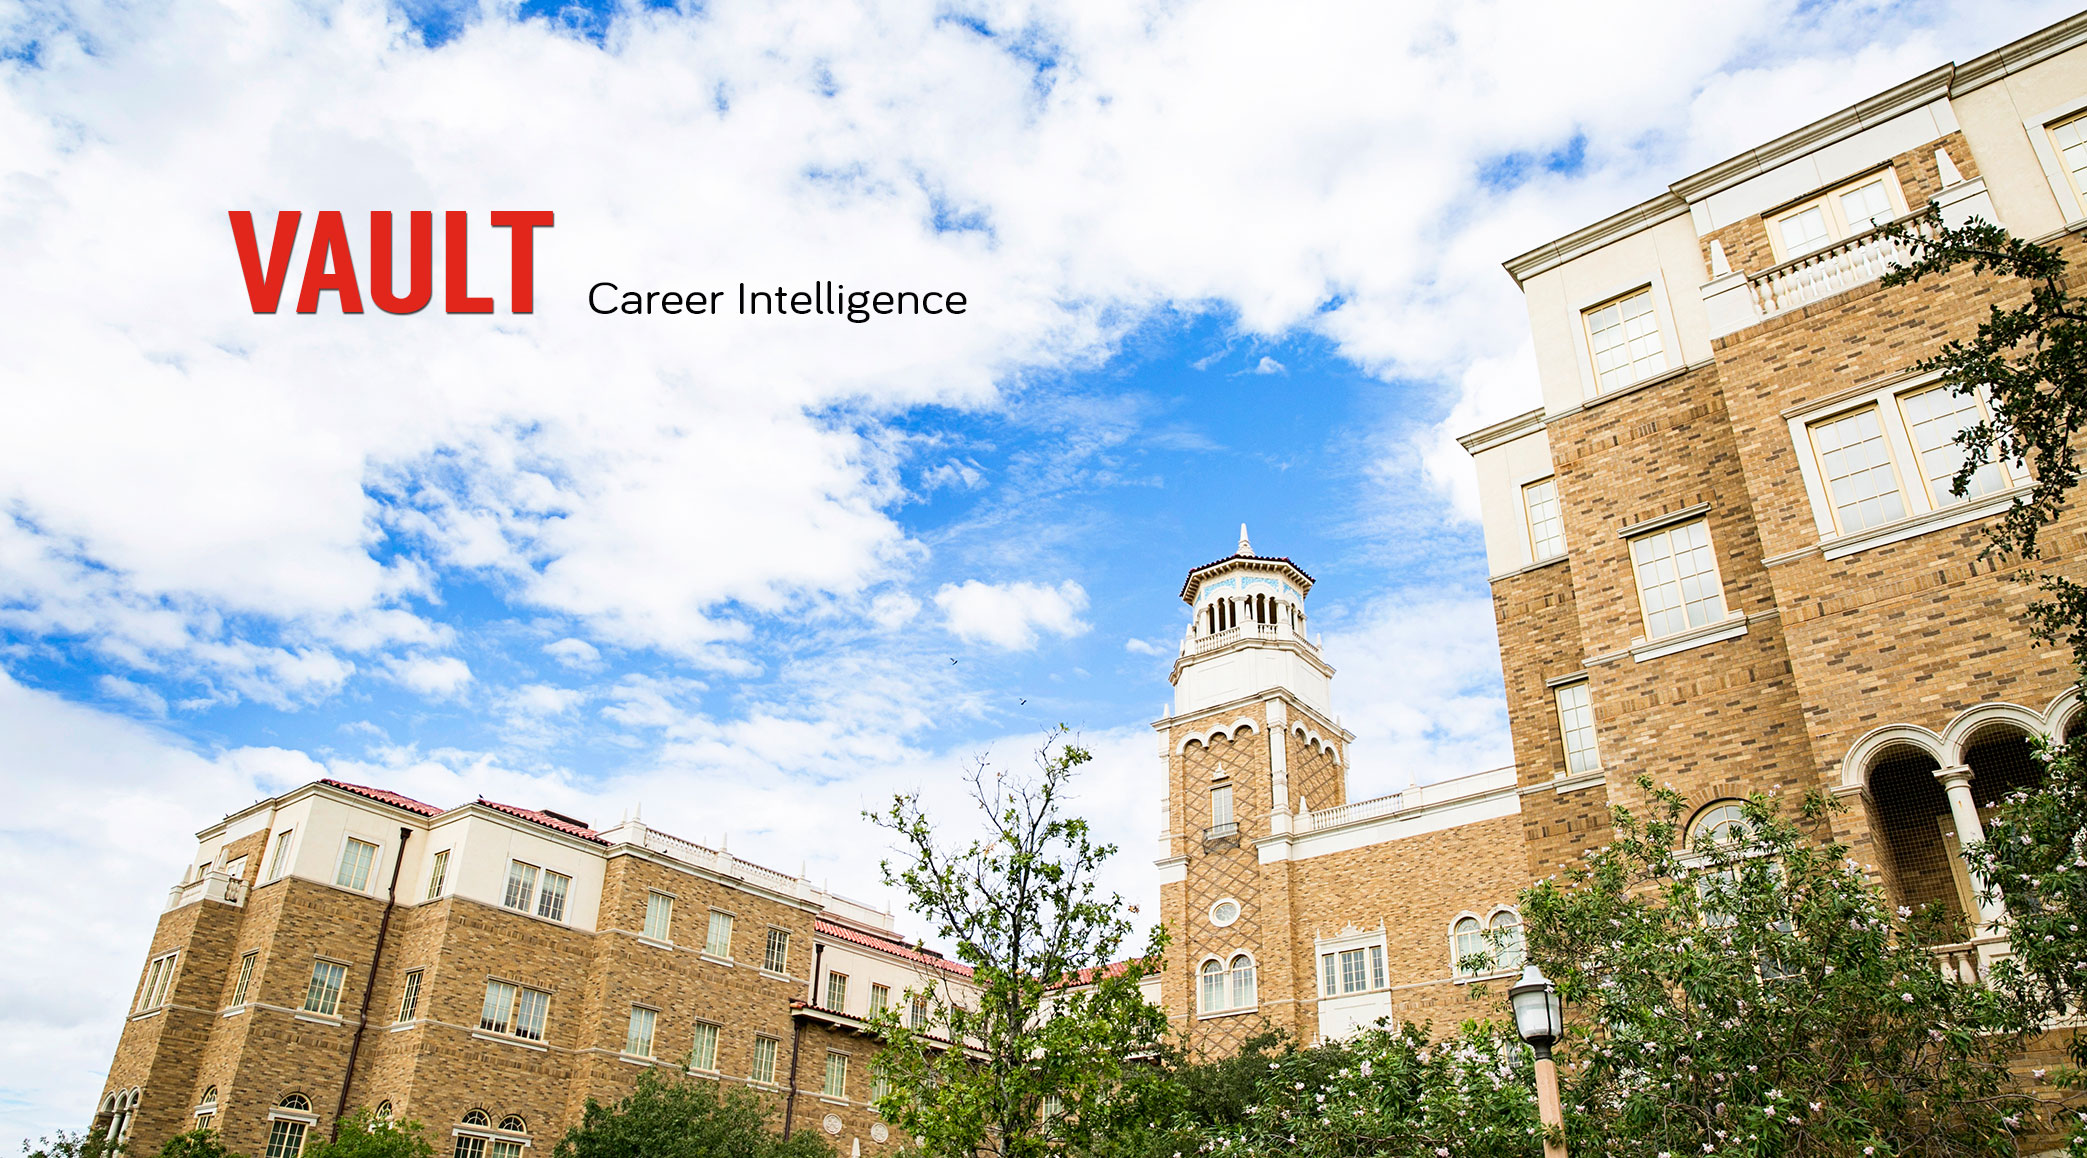 Vault Career Intelligence provides in-depth intelligence on what it's really like to work in an industry, company or profession!